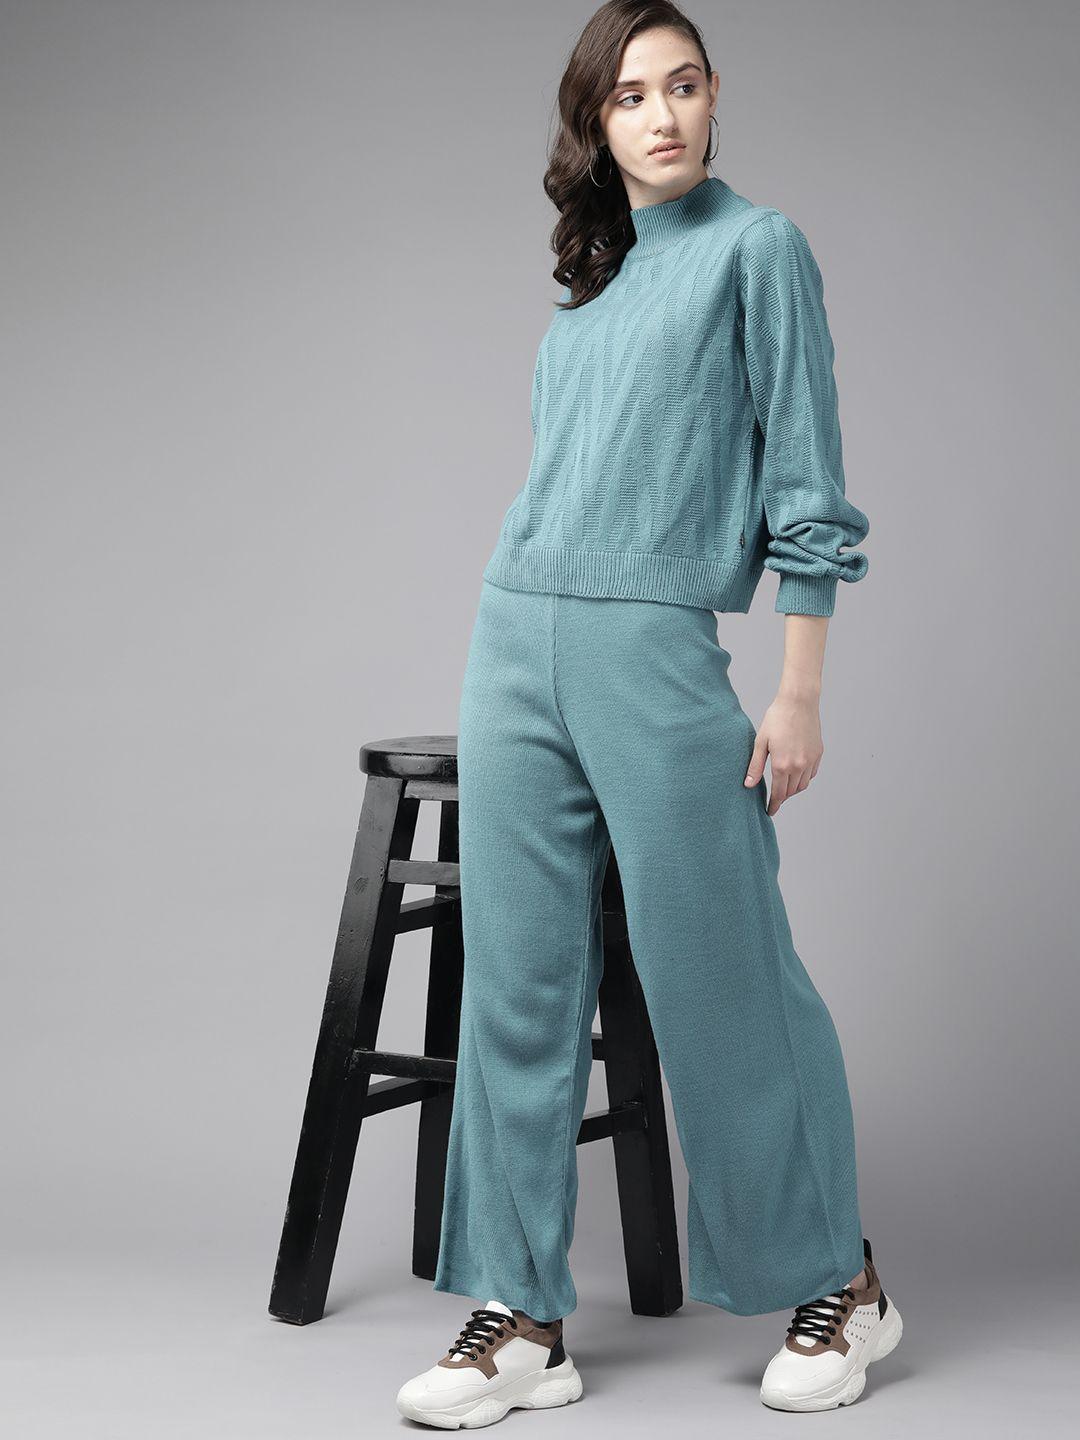 the roadster lifestyle co. women blue solid knitted sweater co-ord set